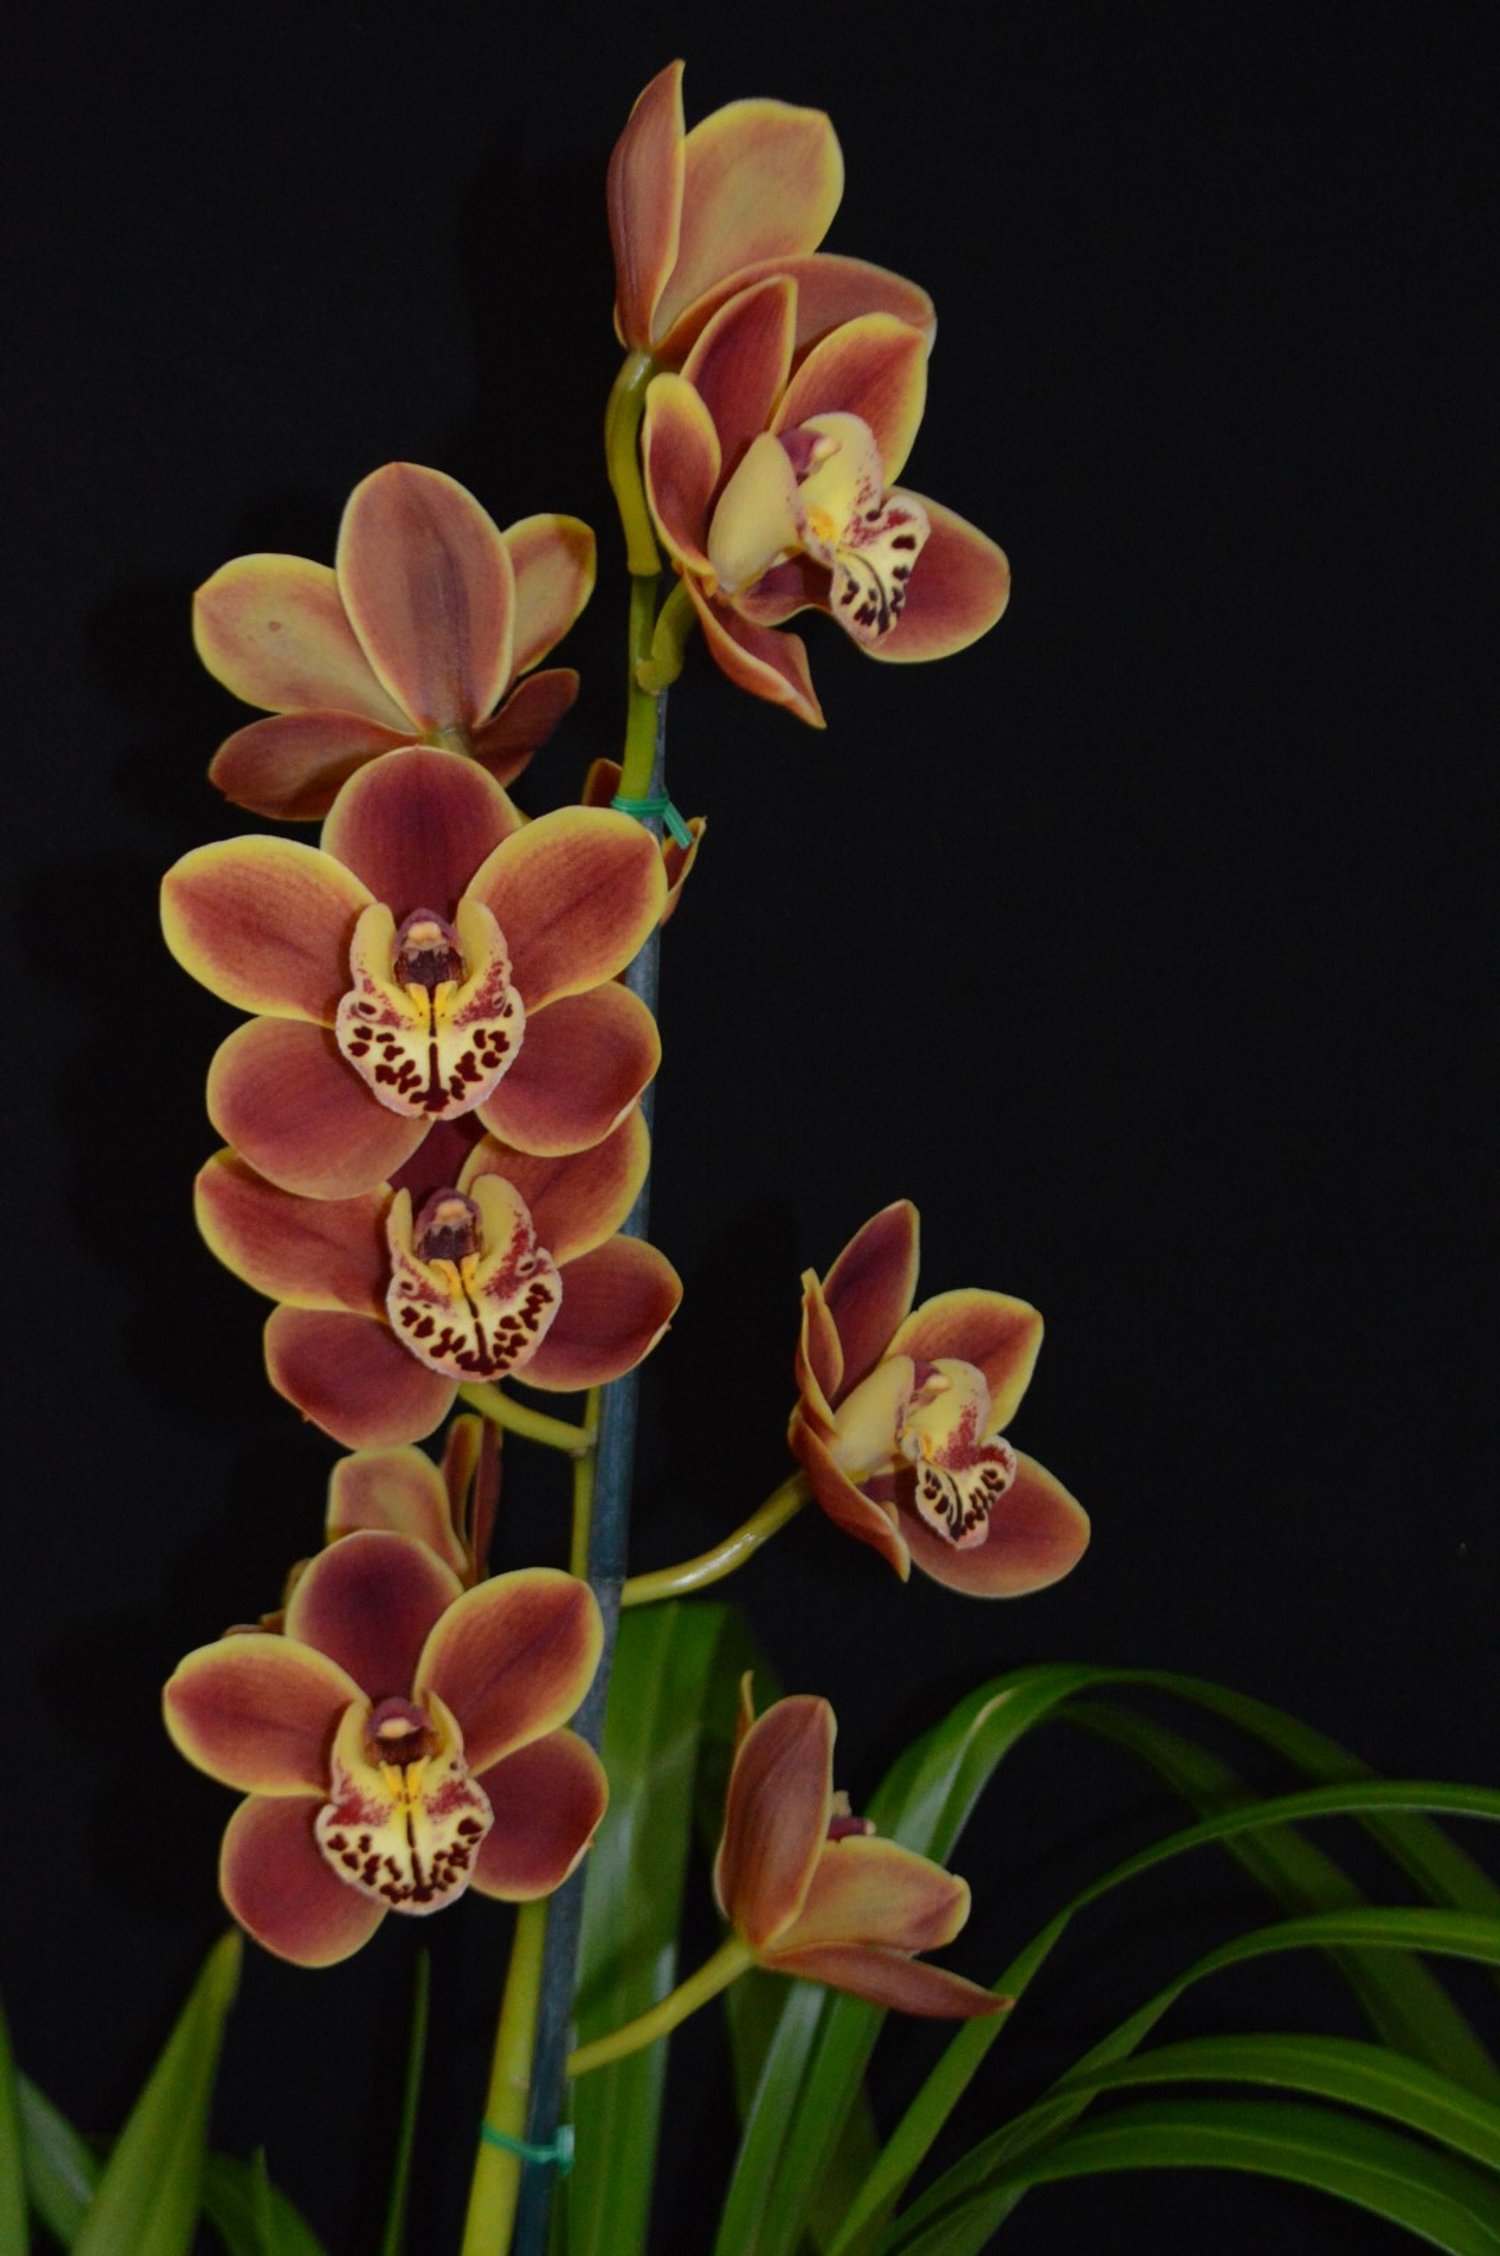 Flower of division (Open): Cym Amigo's Delight, grown by Chee Ng